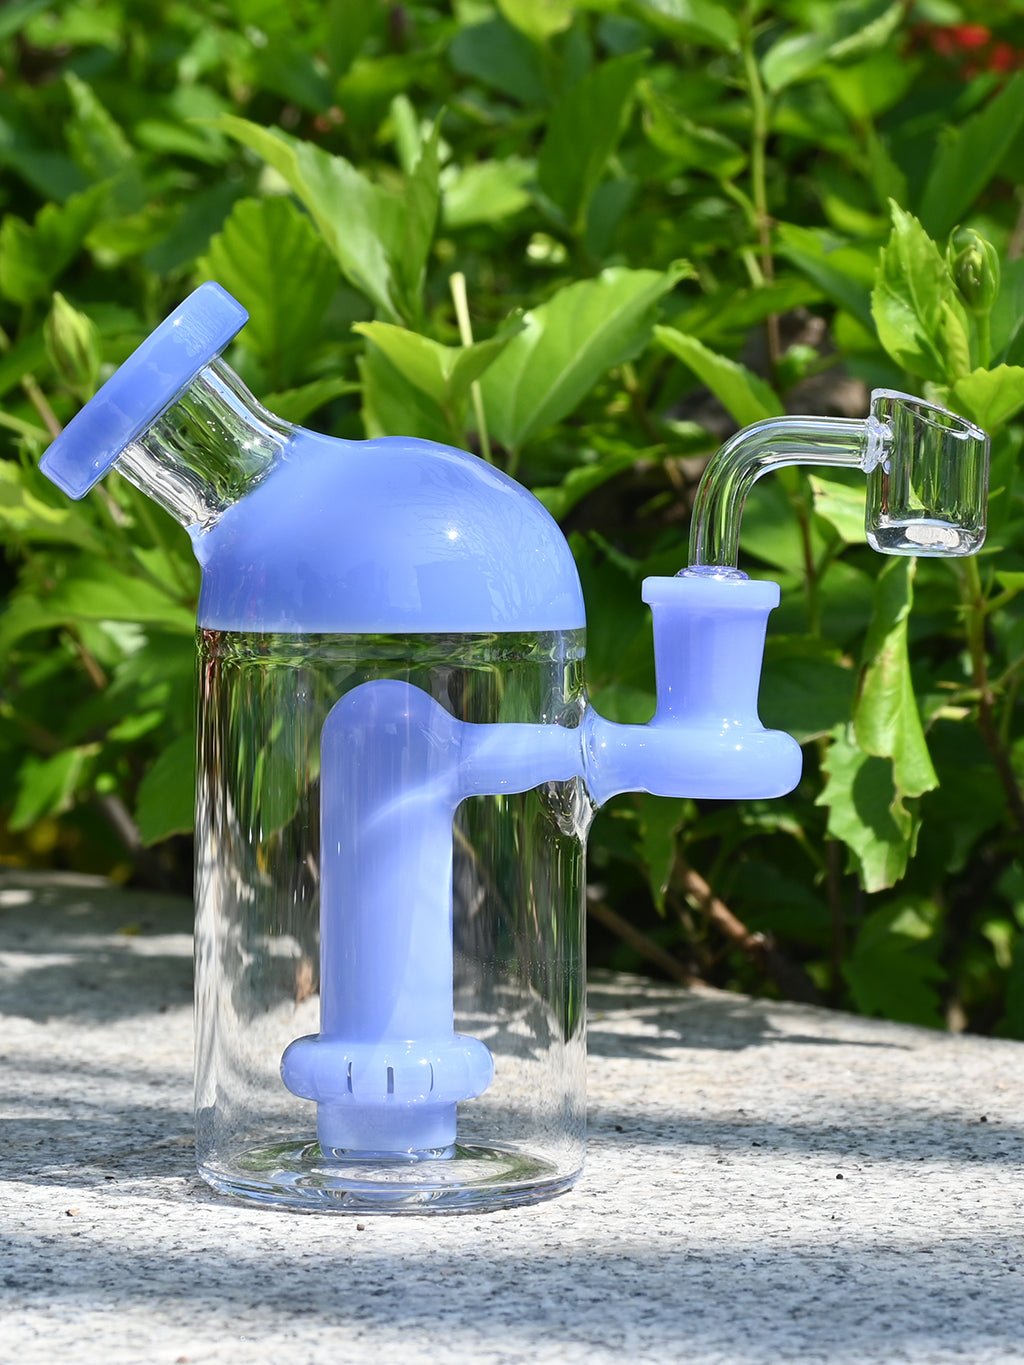 Fully Weld Terp Slurper Bear Quartz Banger Nail Smoking Accessories Ruby  Pearl Pill Carb Cap Marble Vacuum For Pipes Dab Rigs From Hymanquartz01,  $14.02 | DHgate.Com